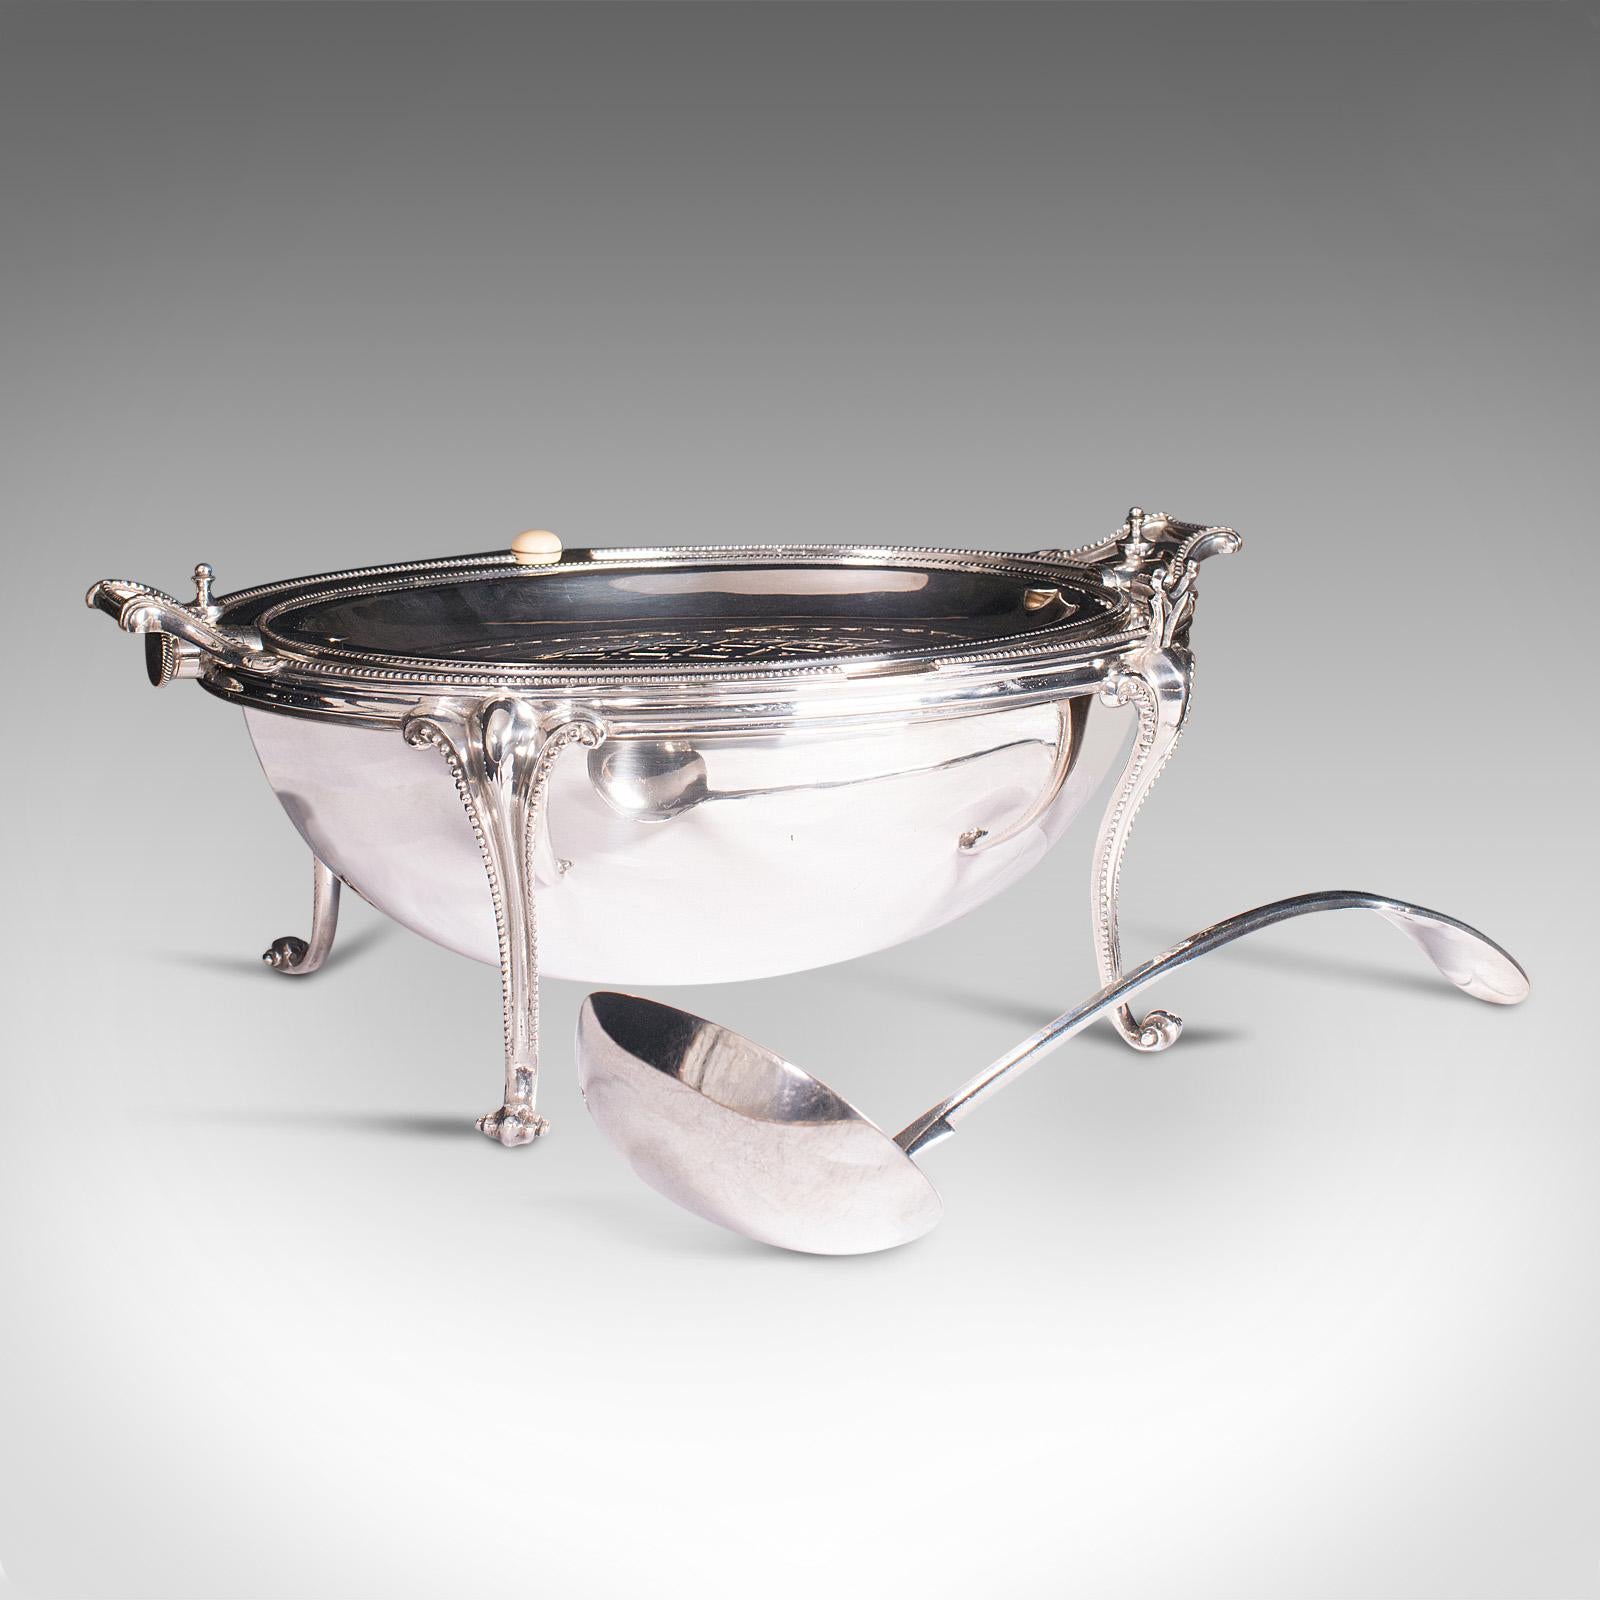 This is an antique roll-over butter dish. An English, silver plated breakfast tureen or server, dating to the Victorian period and later, circa 1870.

Striking dome topped serving dish with later ladle - an admirable centrepiece
Displays a